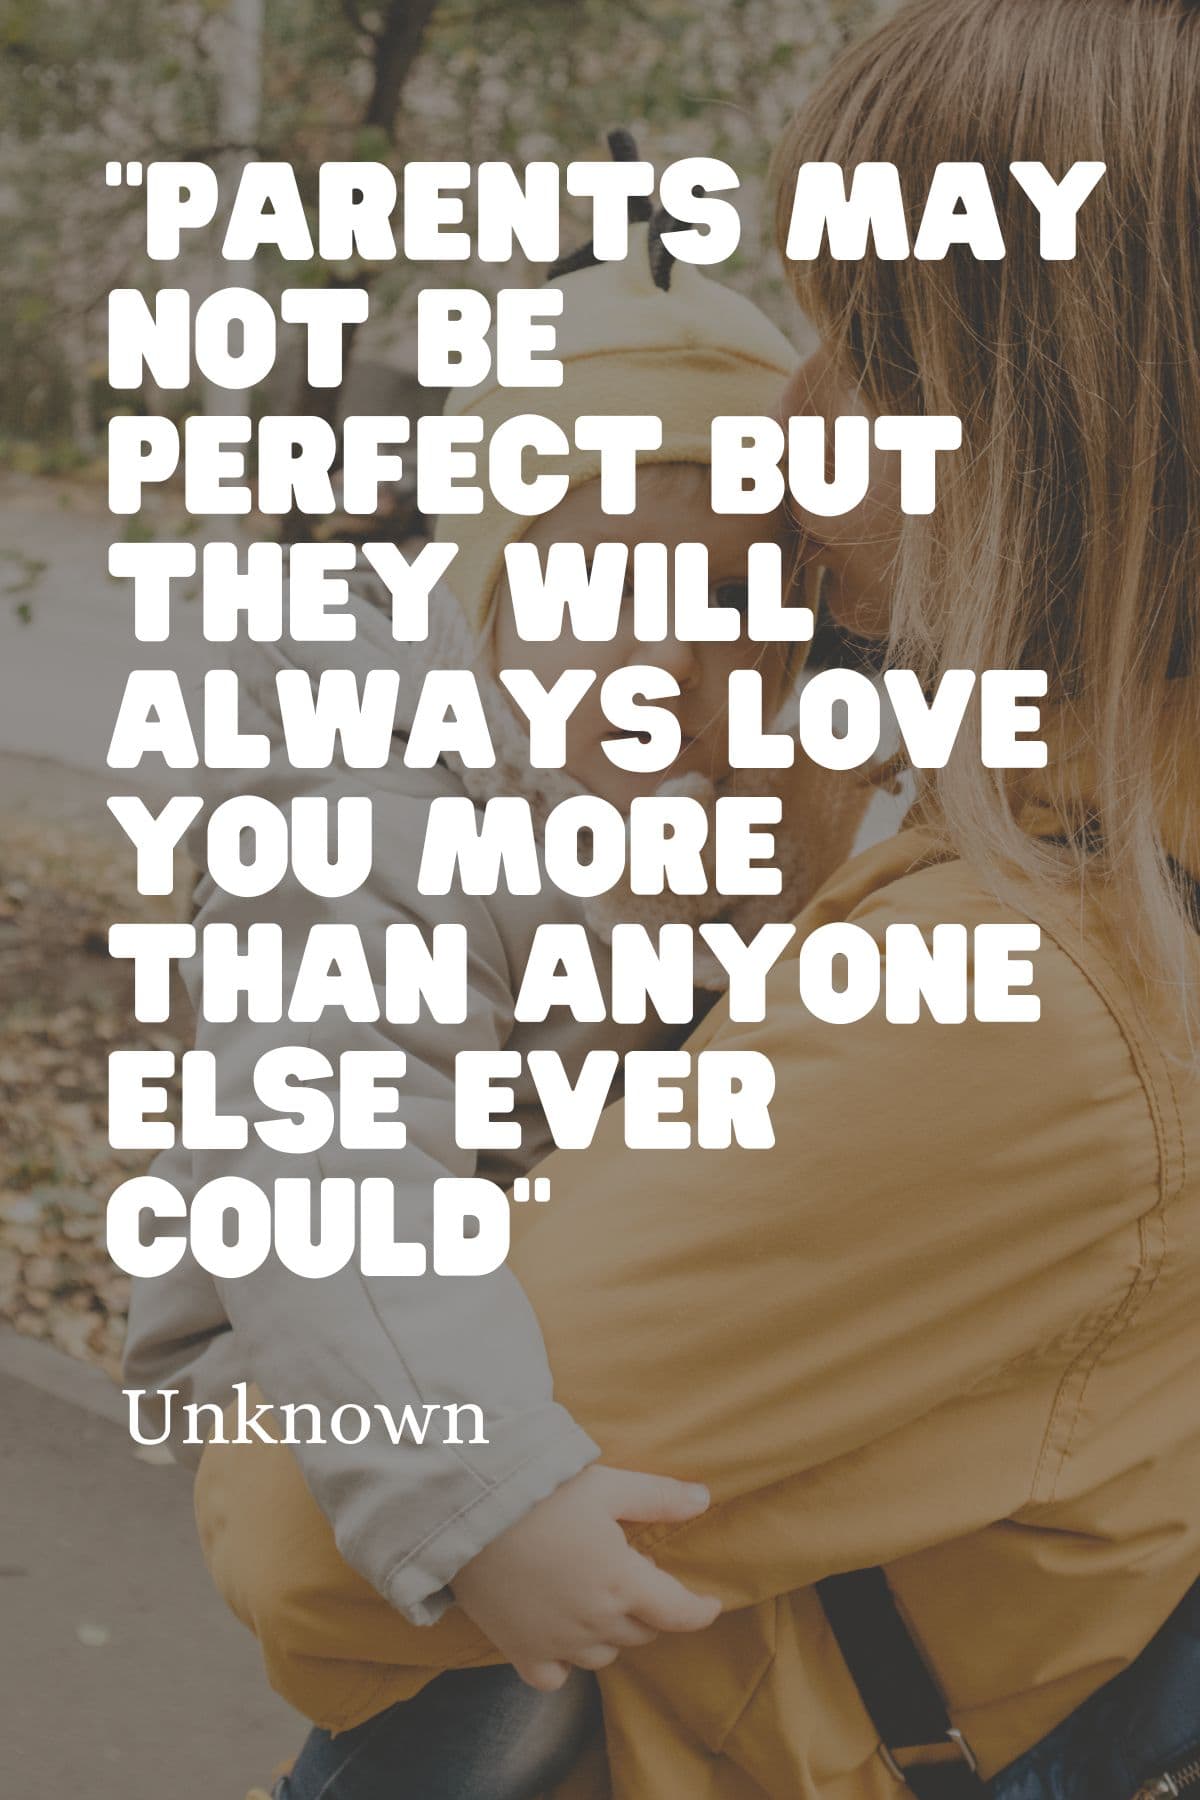 "Parents may not be perfect but they will always love you more than anyone else ever could" – Unknown